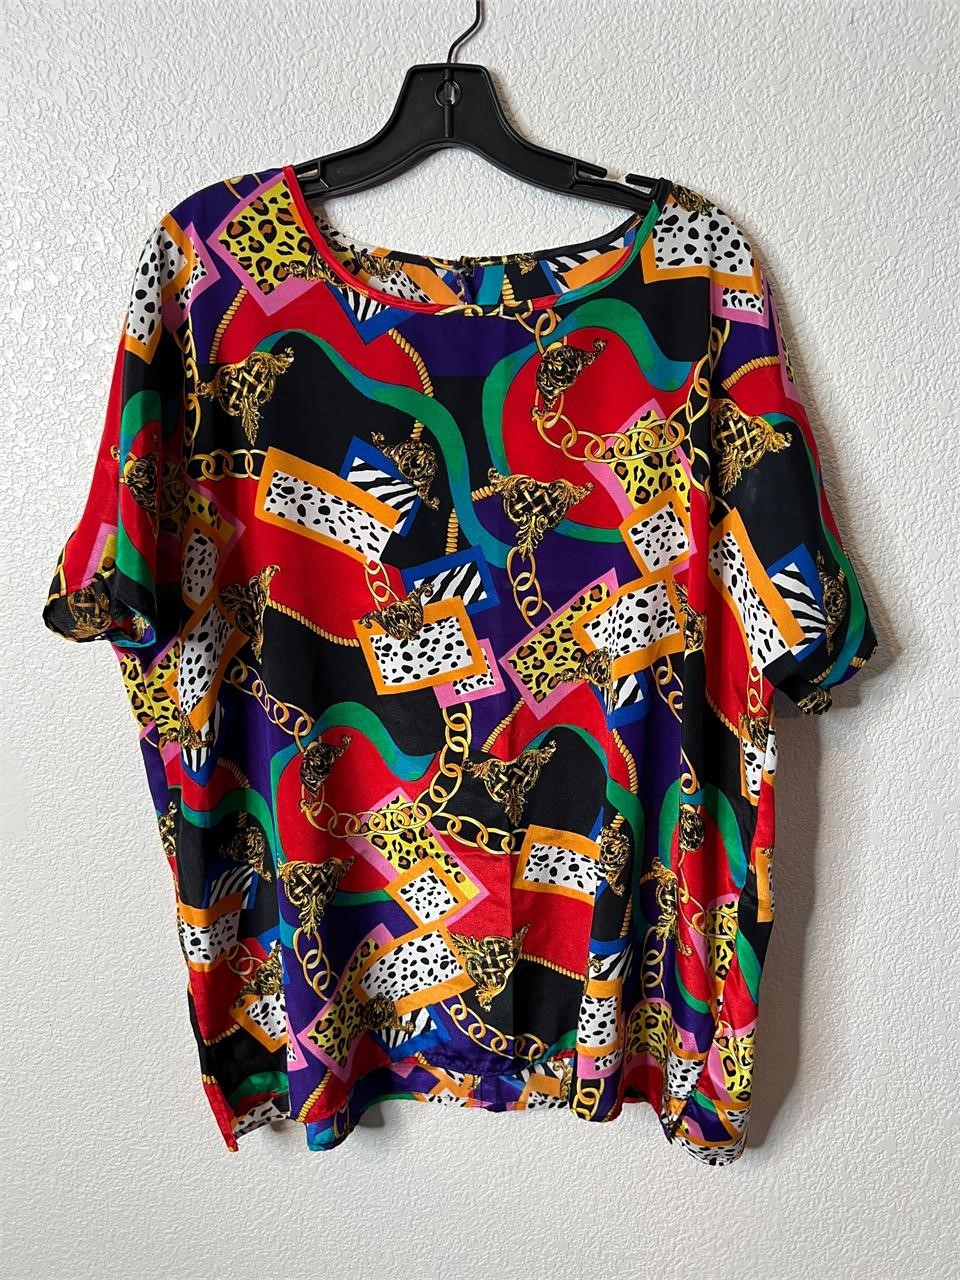 Vintage Femme Top Chains Colorful Wild